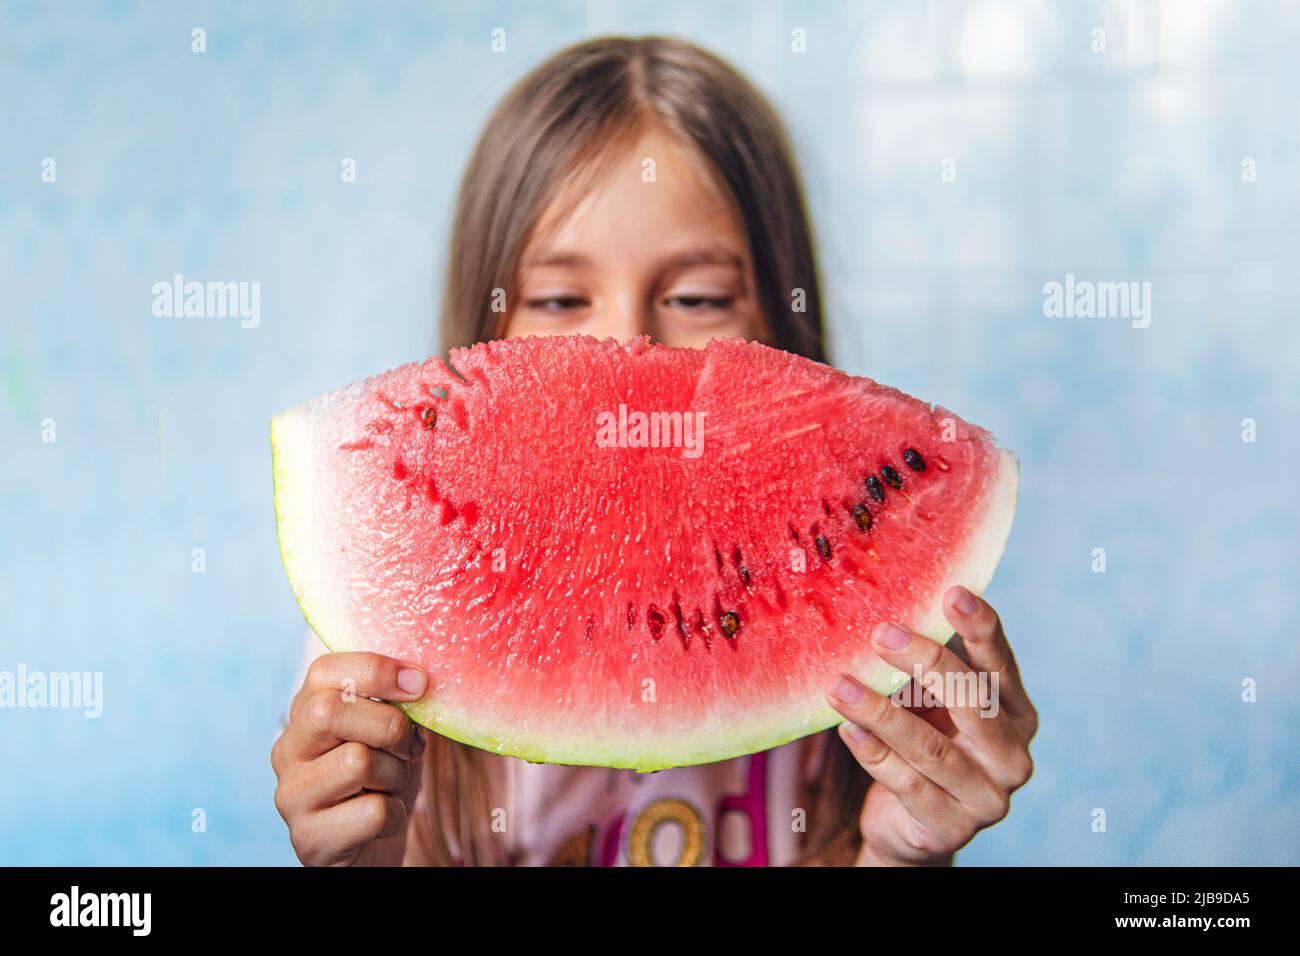 8 years old child eating watermelon at home. A large piece of ripe red watermelon in the hands of a little girl on a blue background. Stock Photo